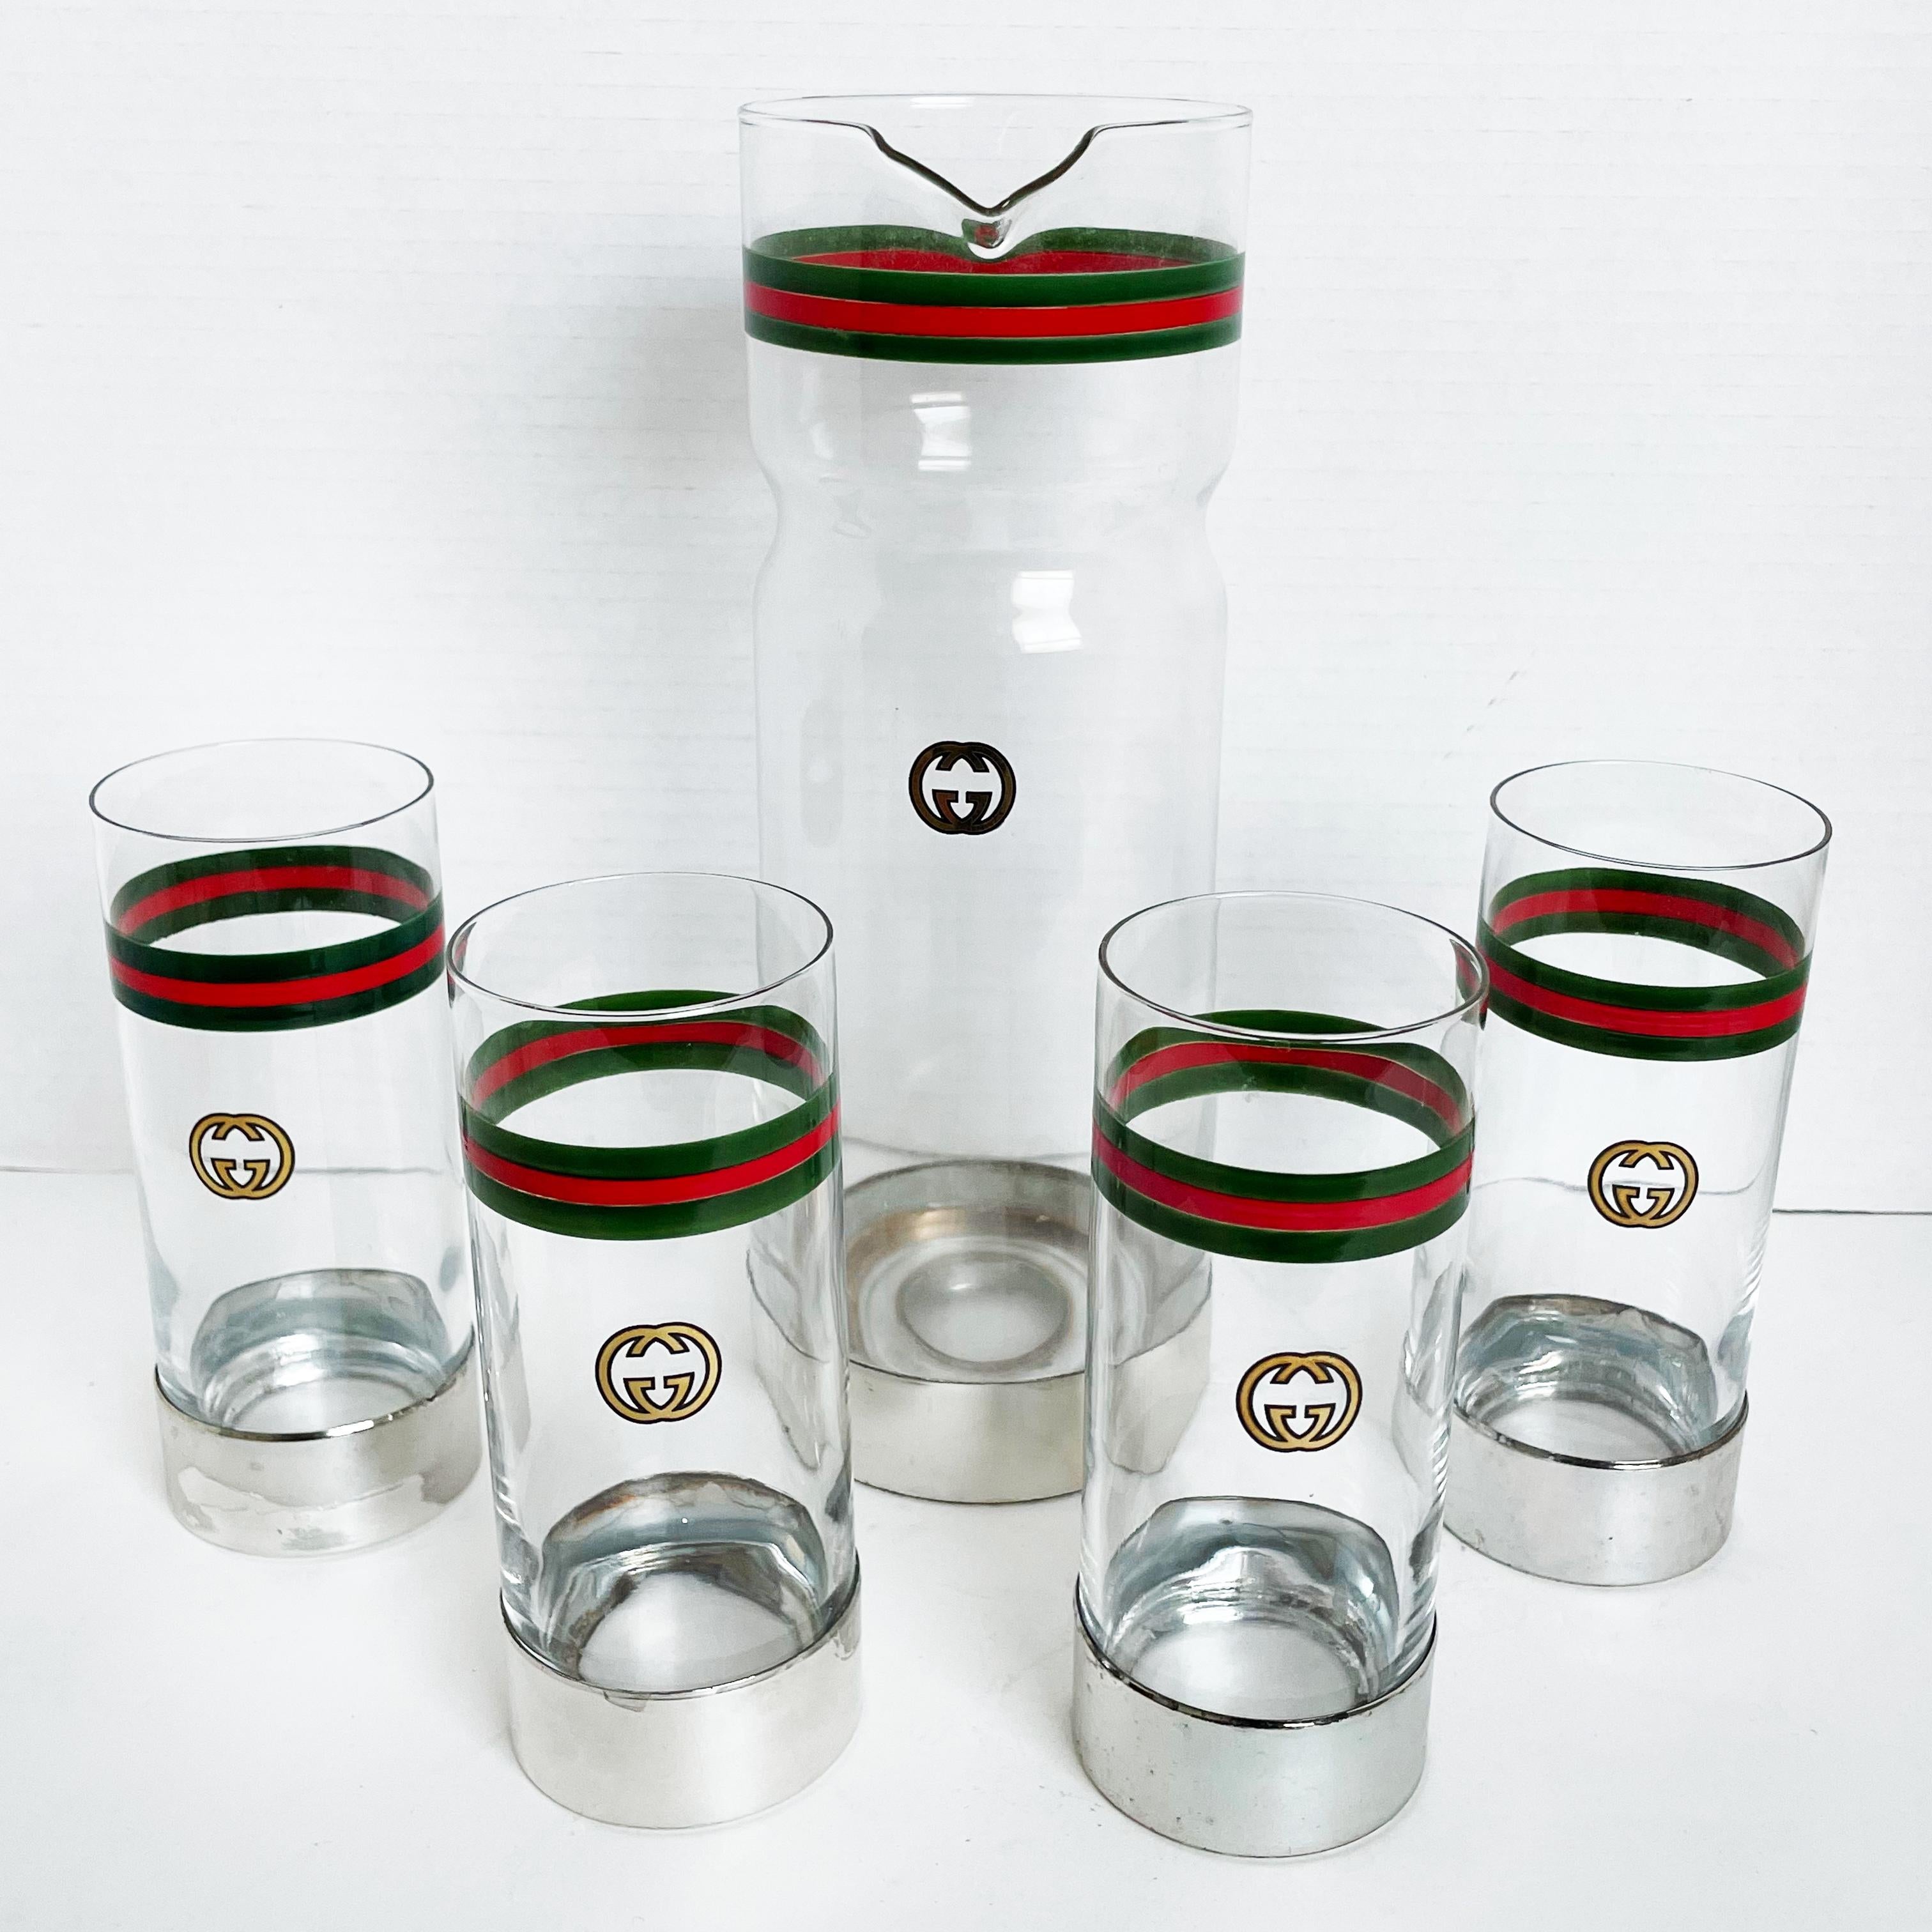 Entertain in style! Authentic, preowned, vintage Gucci 5pc barware set: GG Logo Webbing Pitcher or Carafe with 4 high ball glasses, likely made in the 80s.  Painted glass on silver metal base. Preowned/vintage with signs of prior use/wear: some